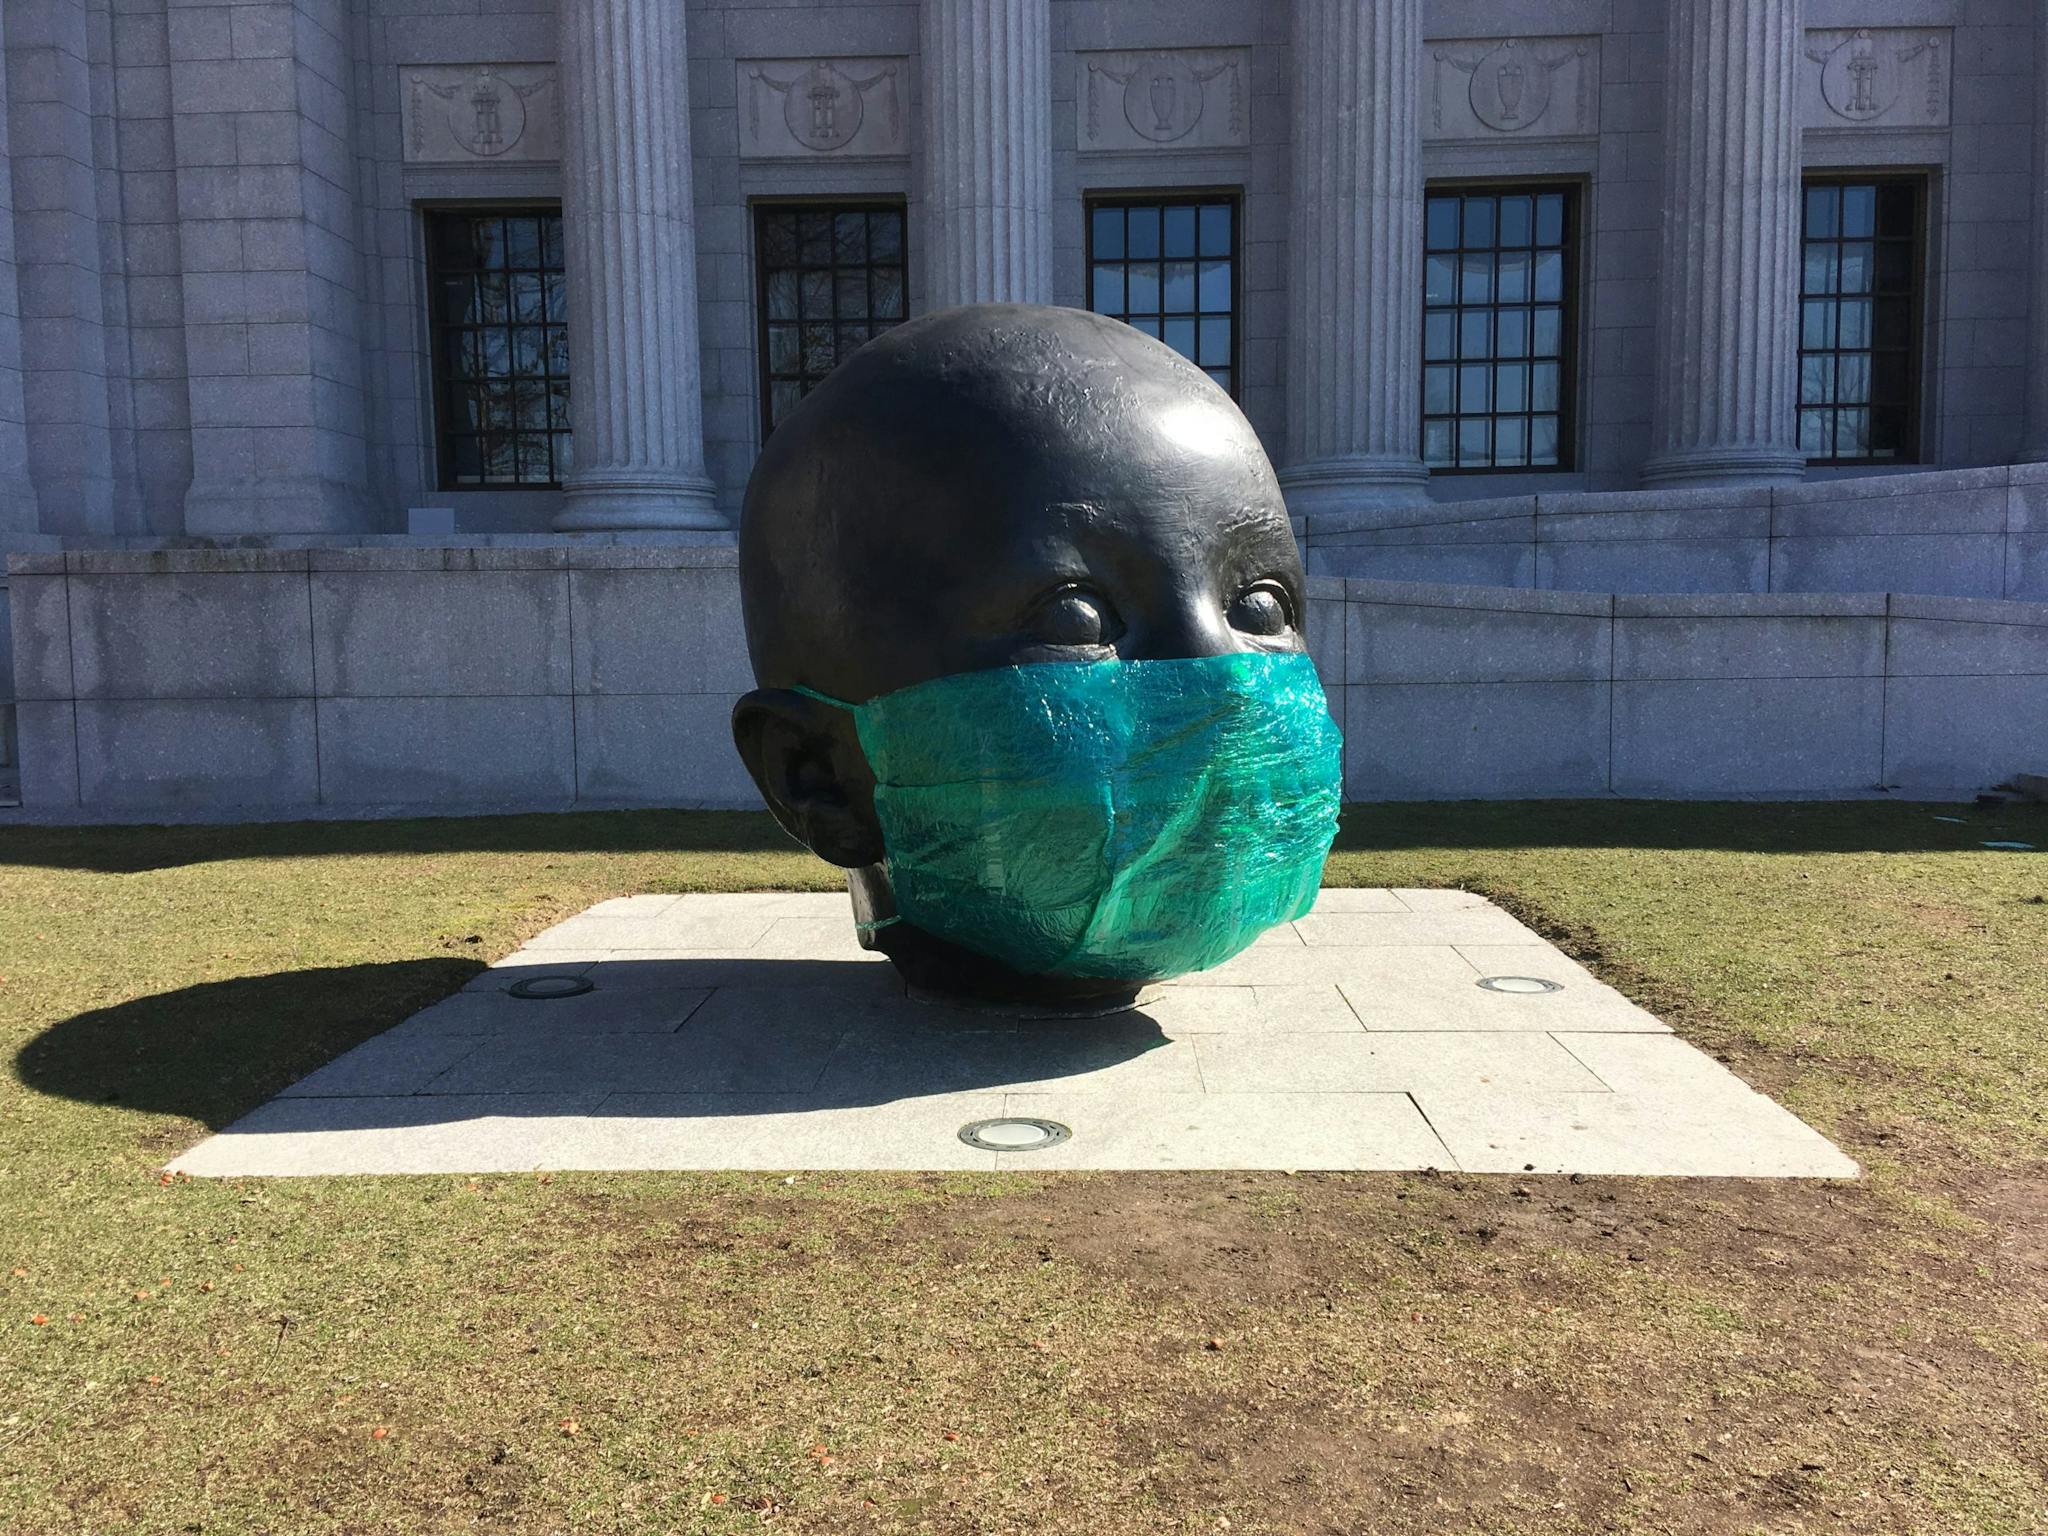 A sculpture represents an individual's head, with a green COVID-19 mask appearing on the lower half of the face.